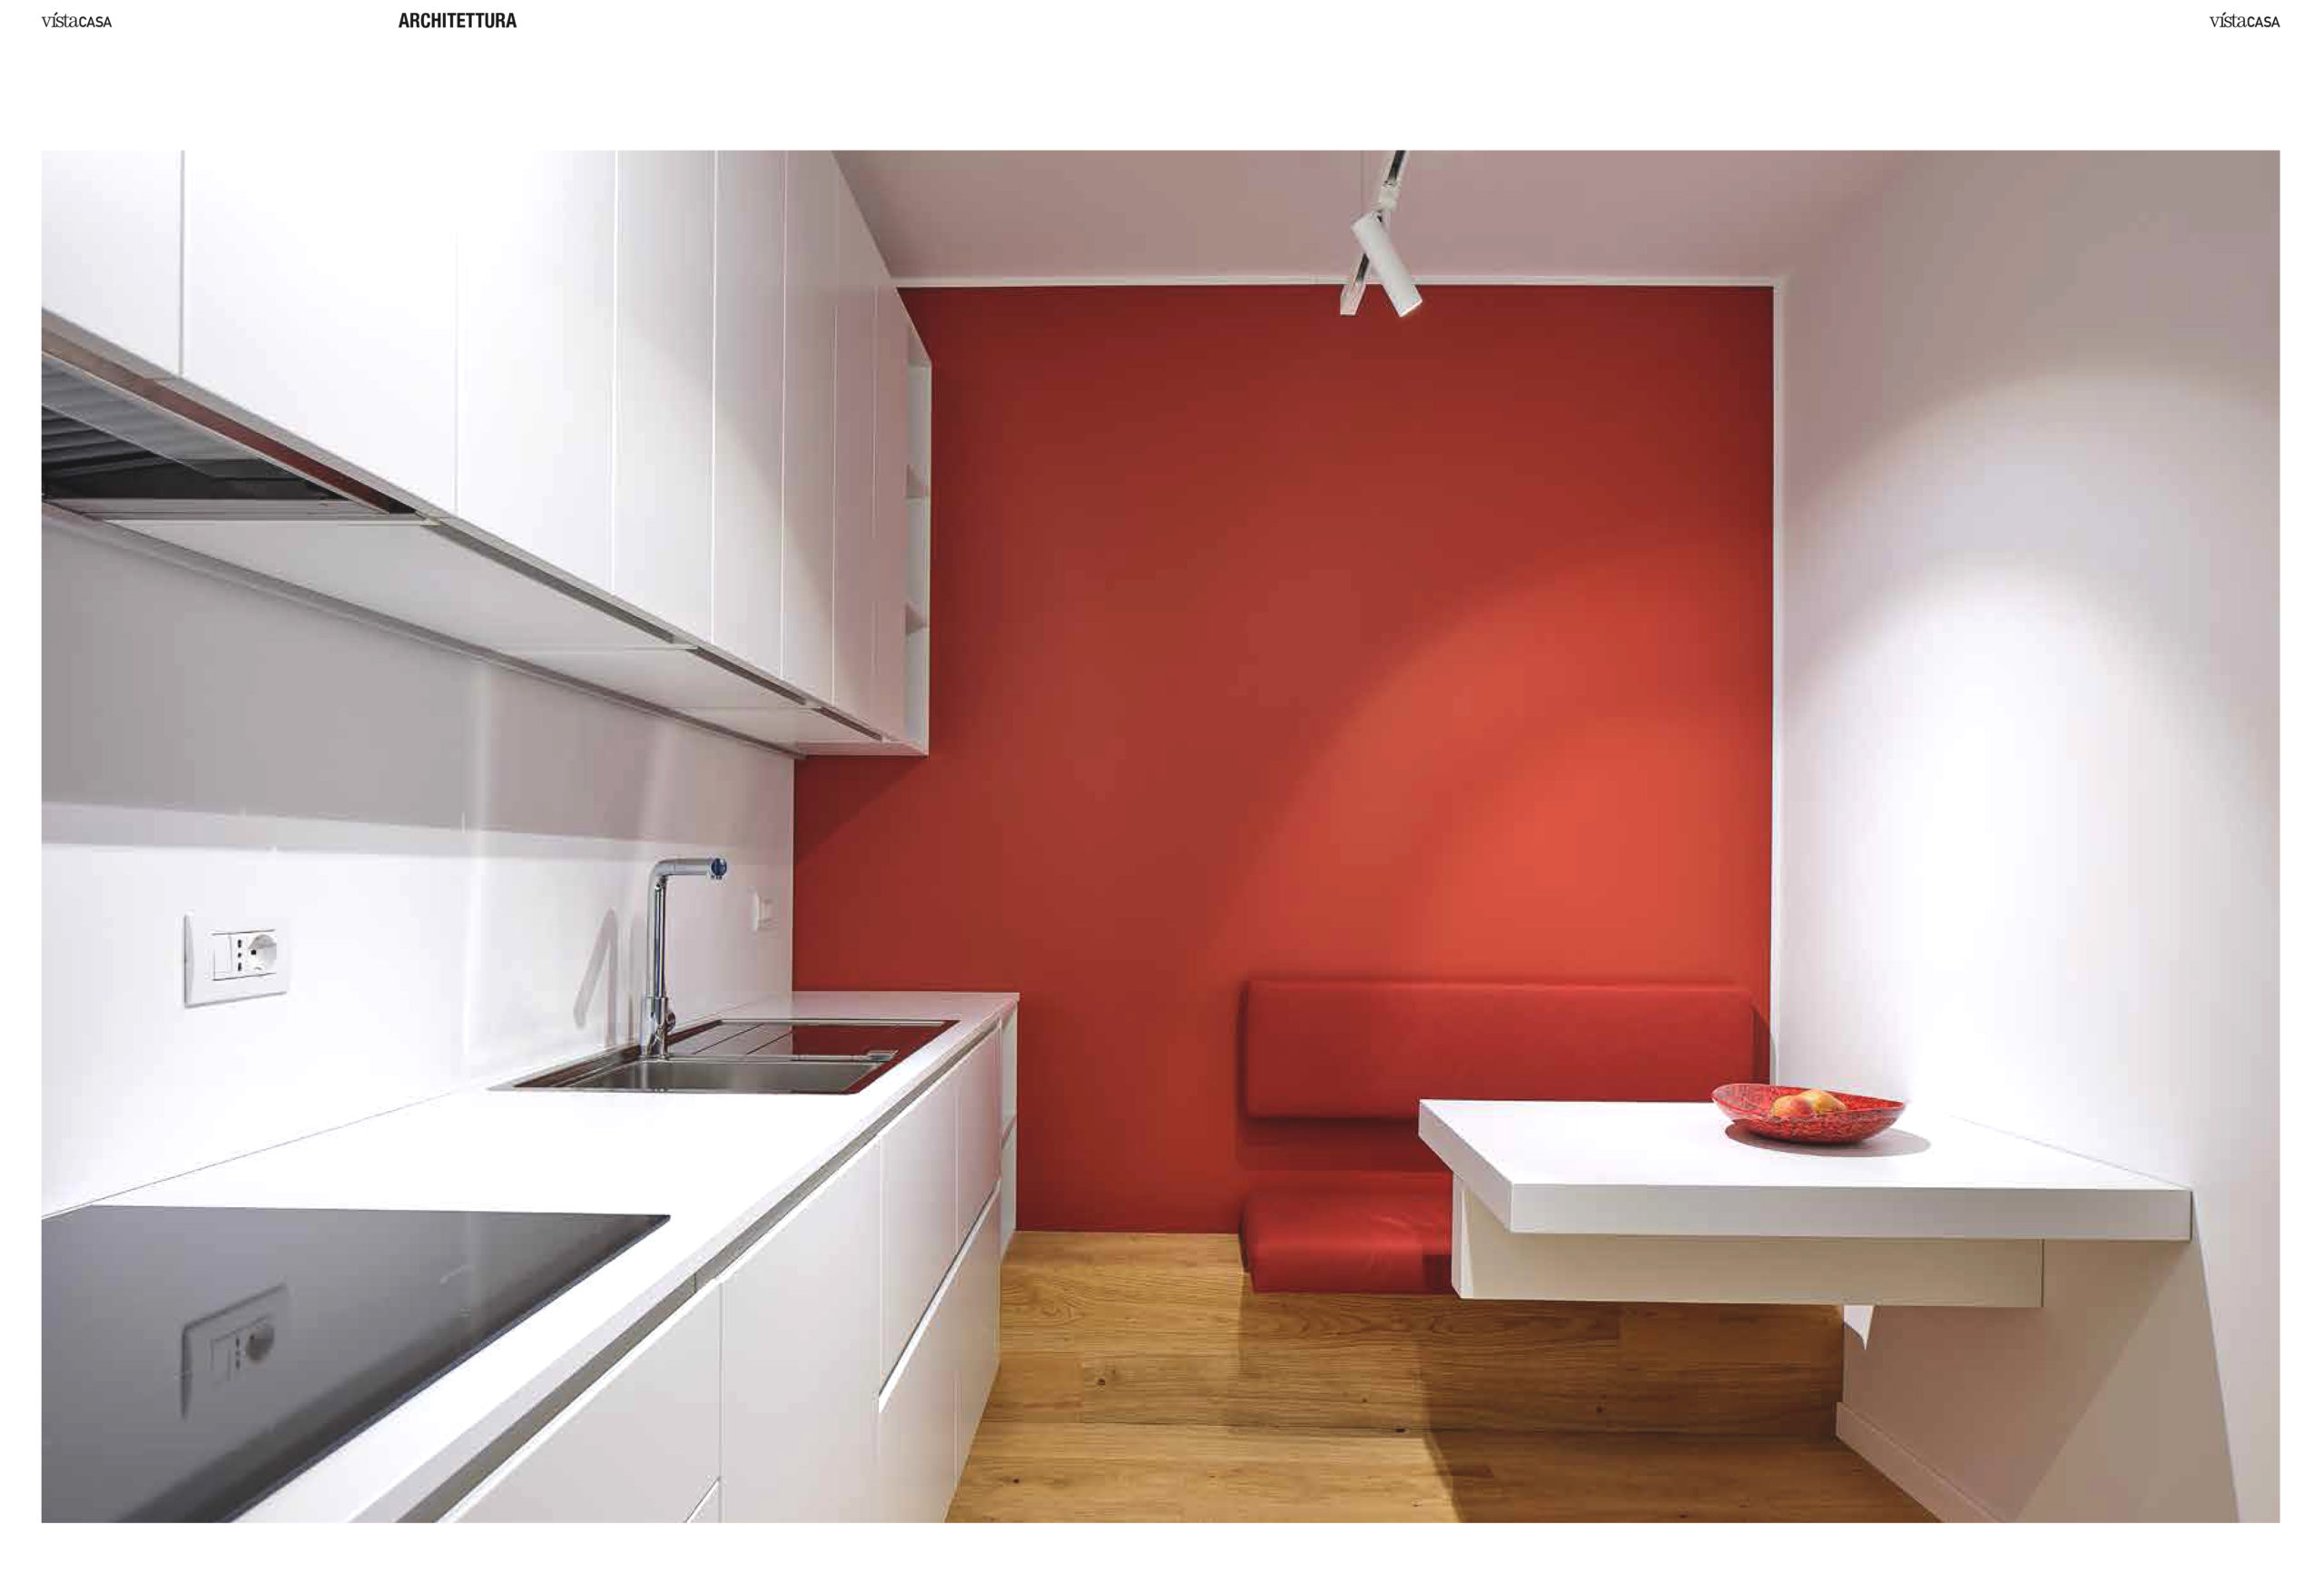 MArchitects_pages 5